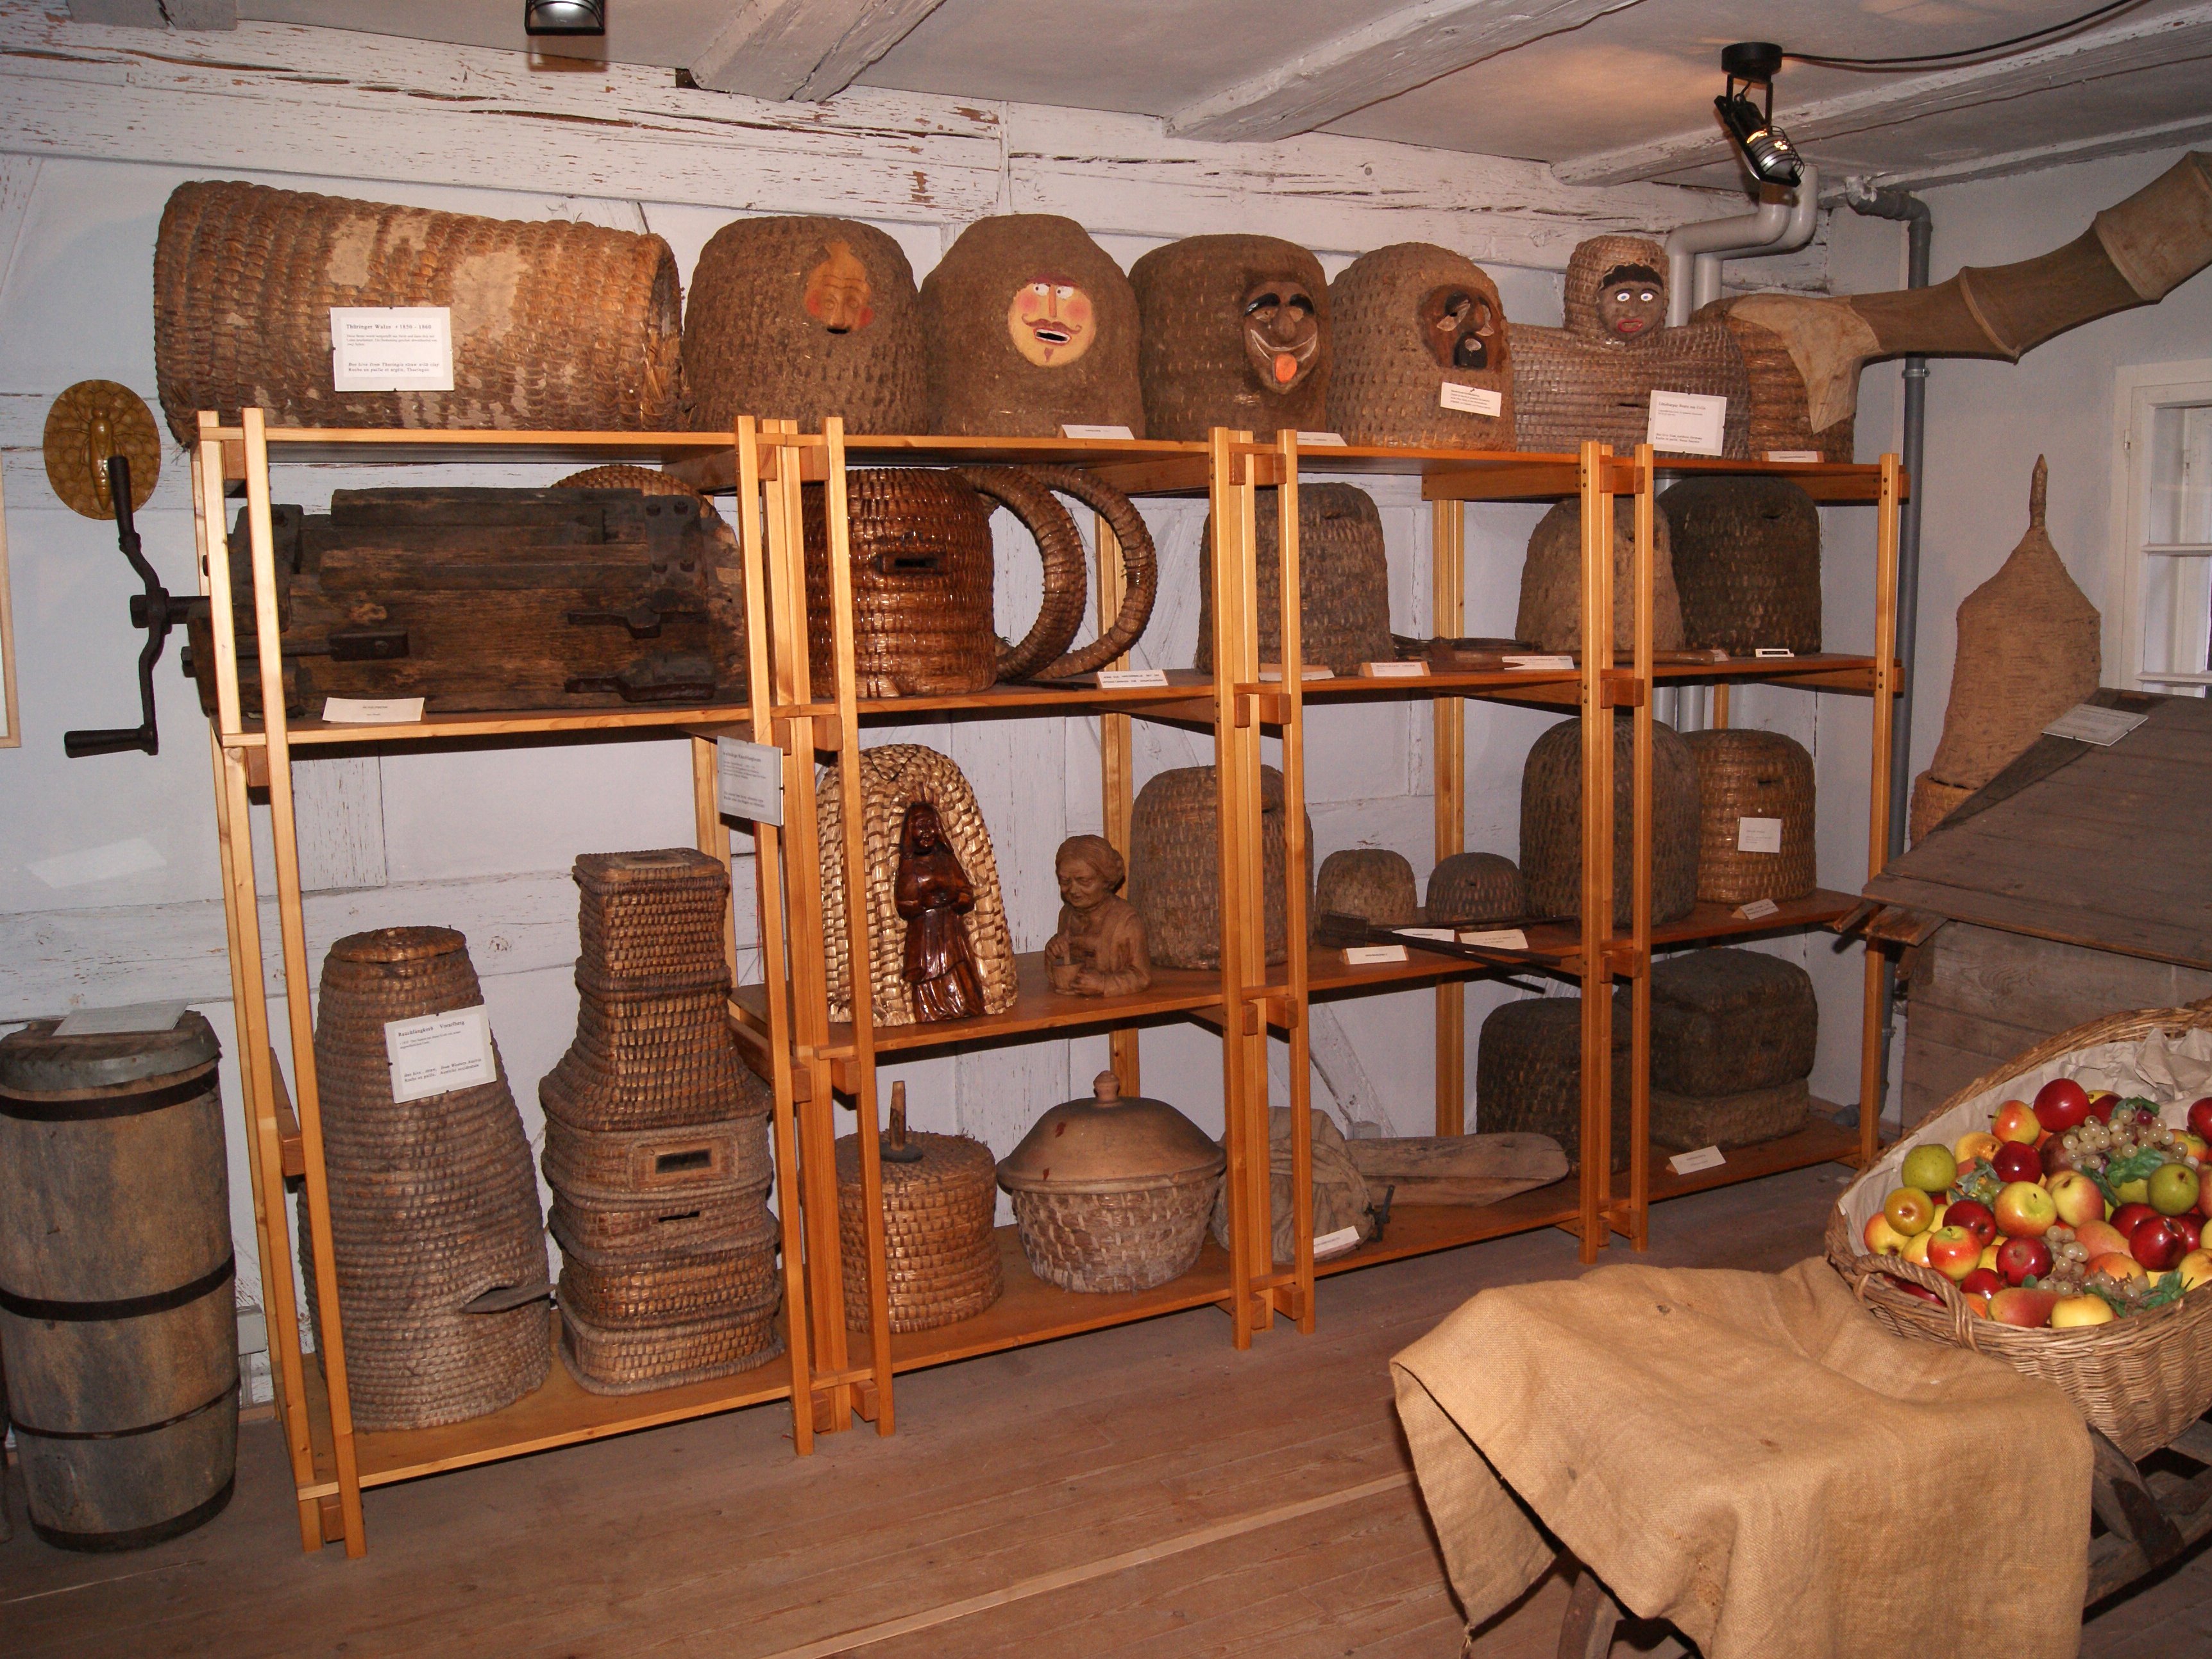 The picture shows various beehives in the Apiculturists Museum